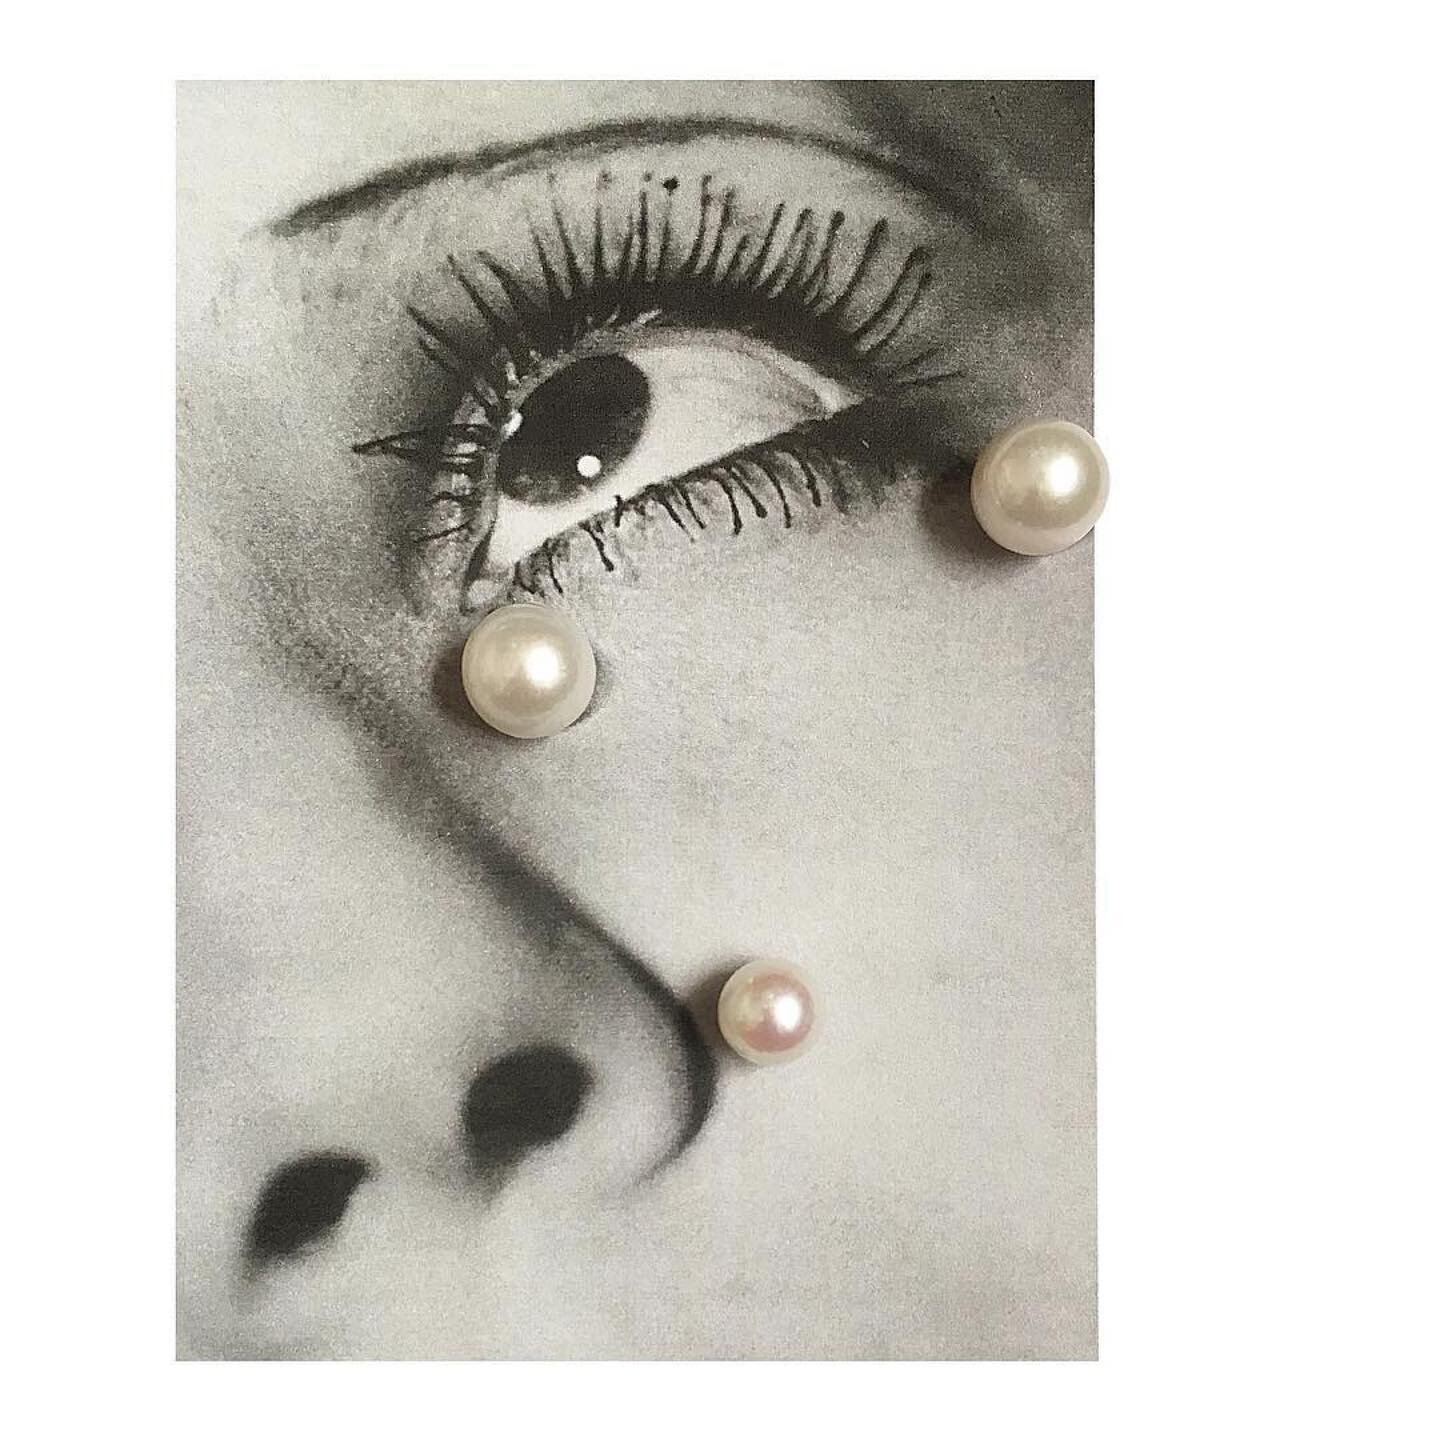 Tier 4 vibes - Man Ray&rsquo;s &lsquo;Glass Tears&rsquo; (1932) + 2020  #pearl upgrade 😢